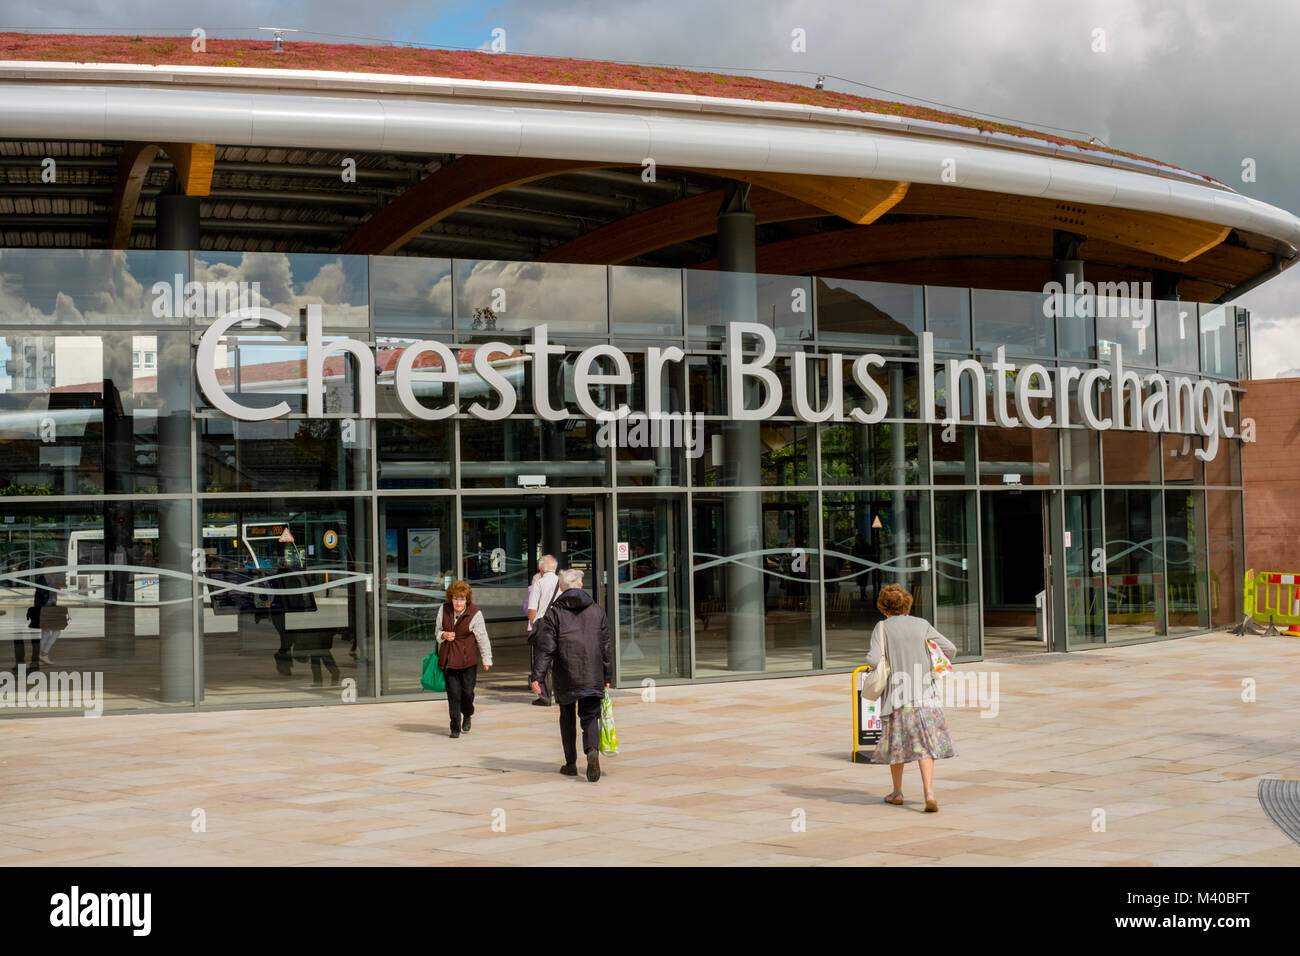 The new bus interchange station in Chester, UK which opened in 2017. Stock Photo